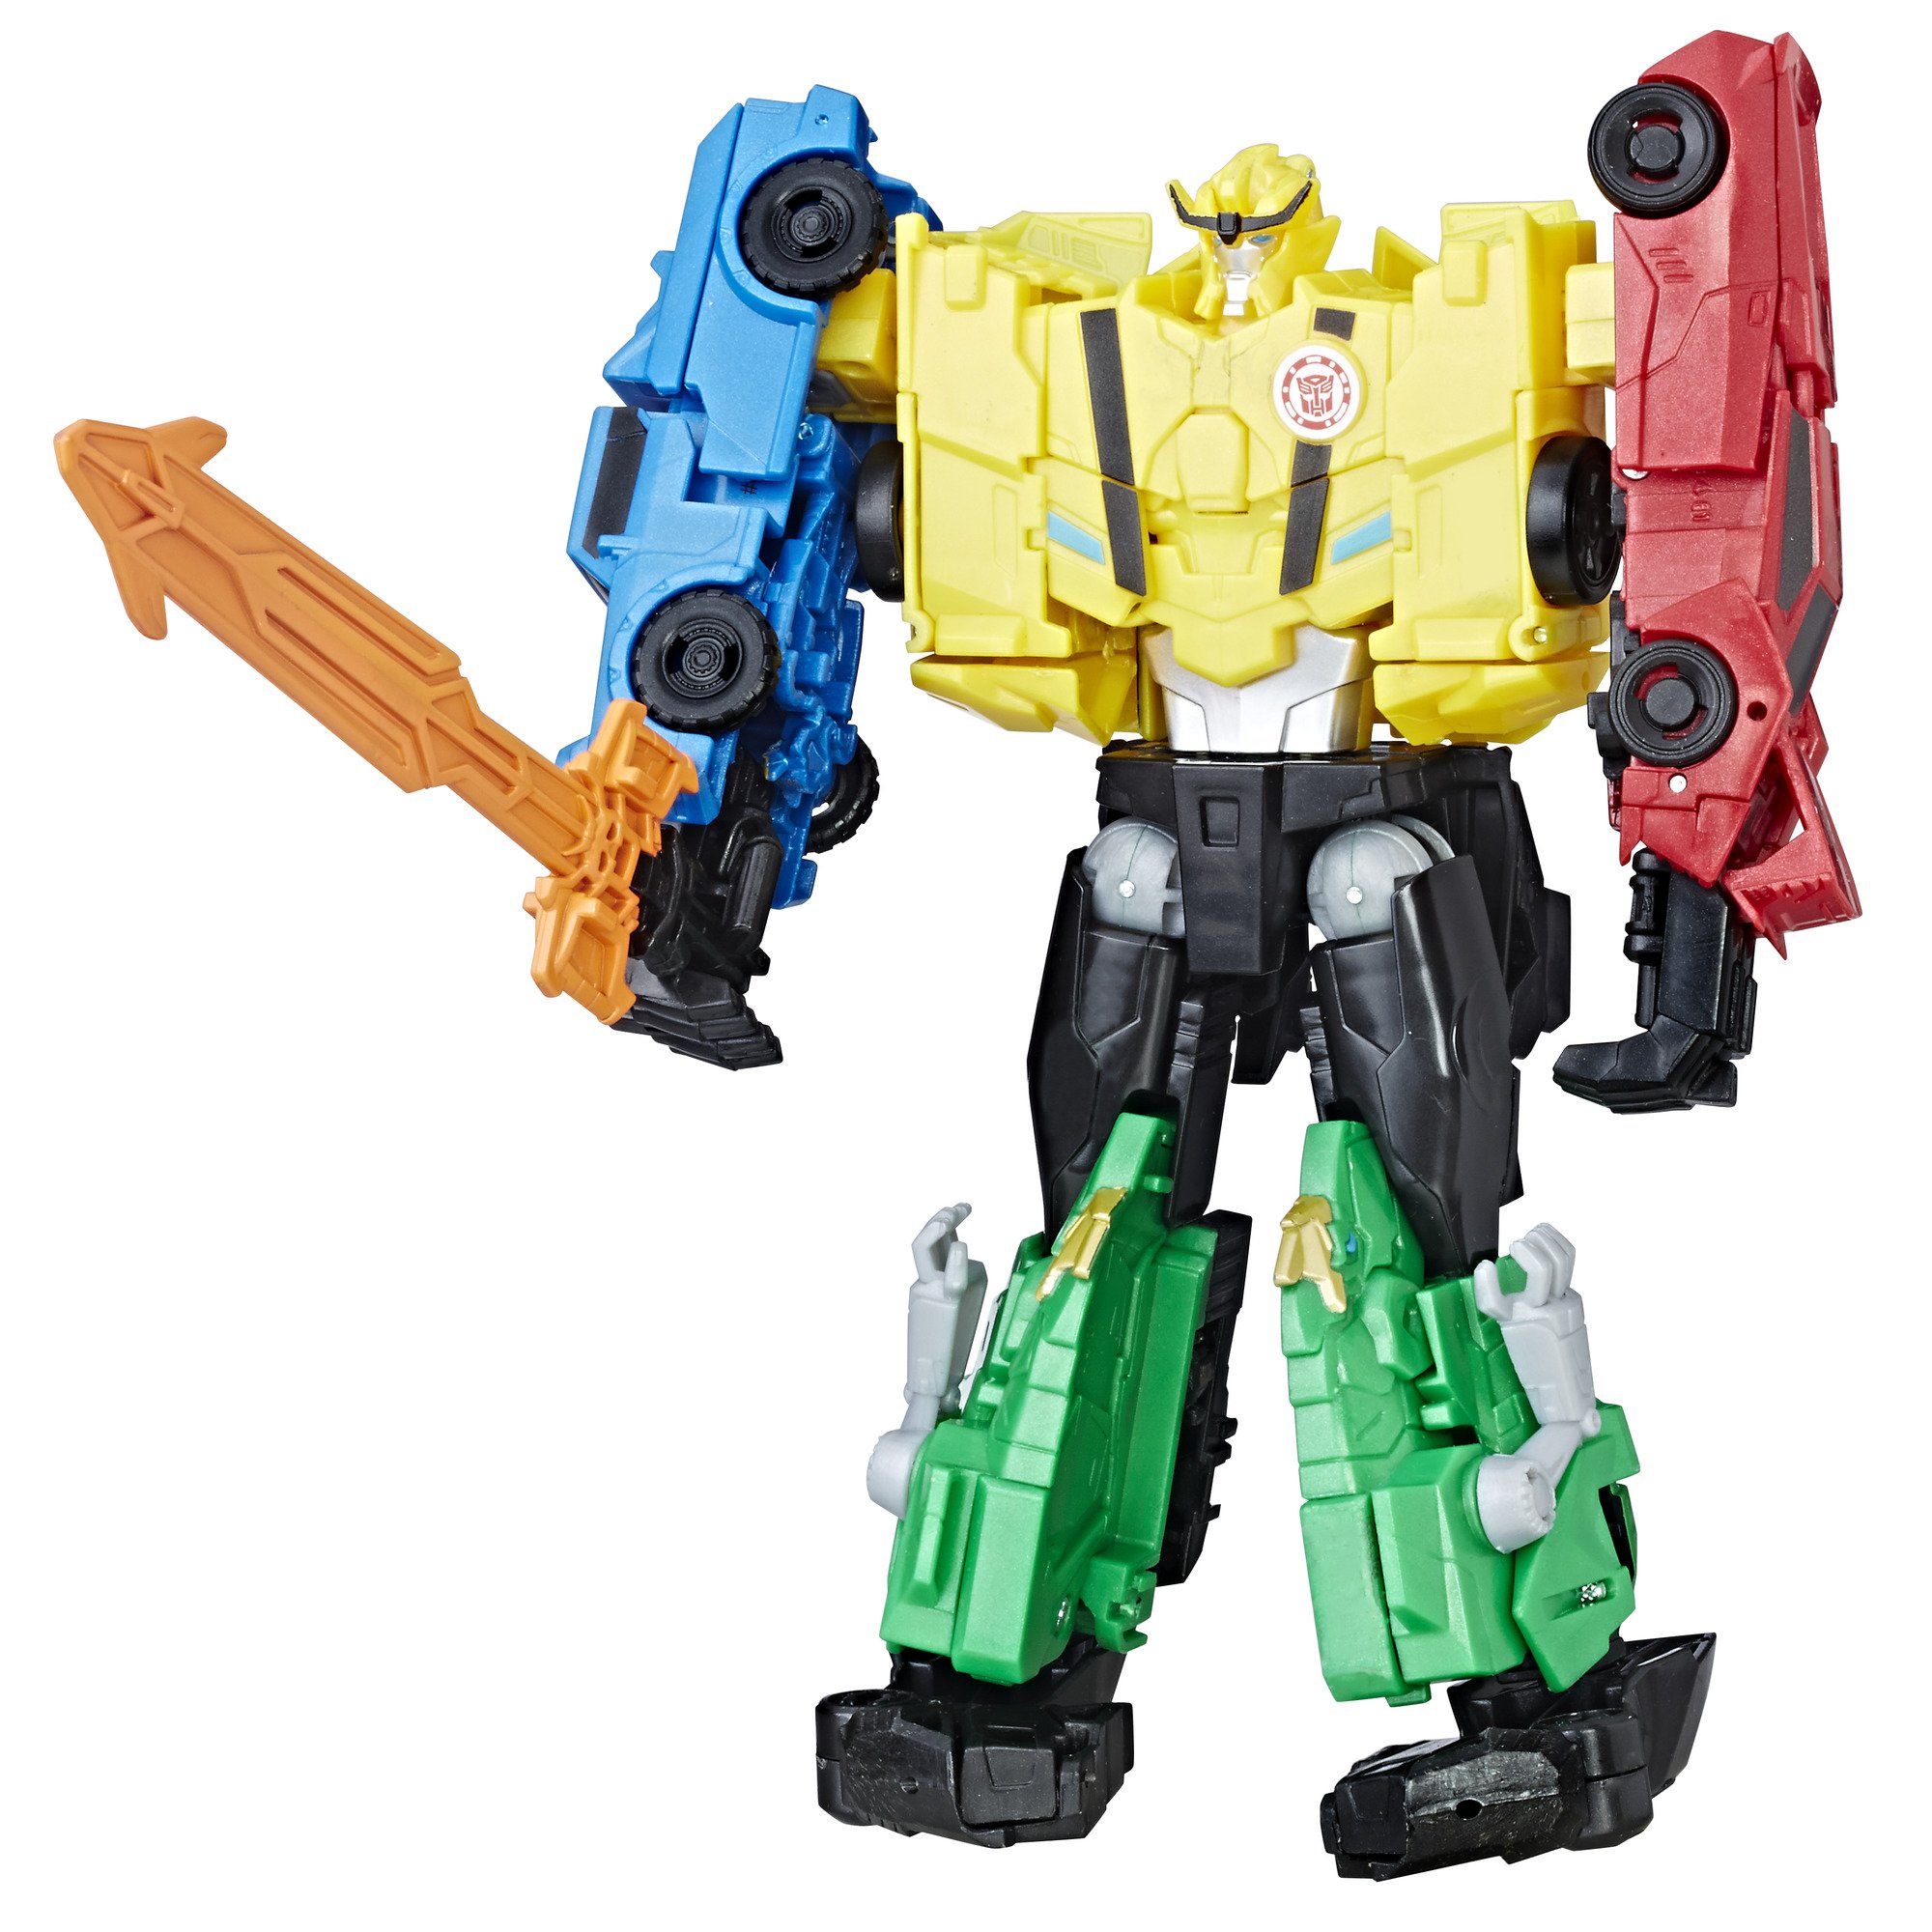 Transformers: Autobot Team Combiner 4 Figure Gift Set (Combines into a Super Robot) $20 + Free Shipping w/ Prime or on $35+